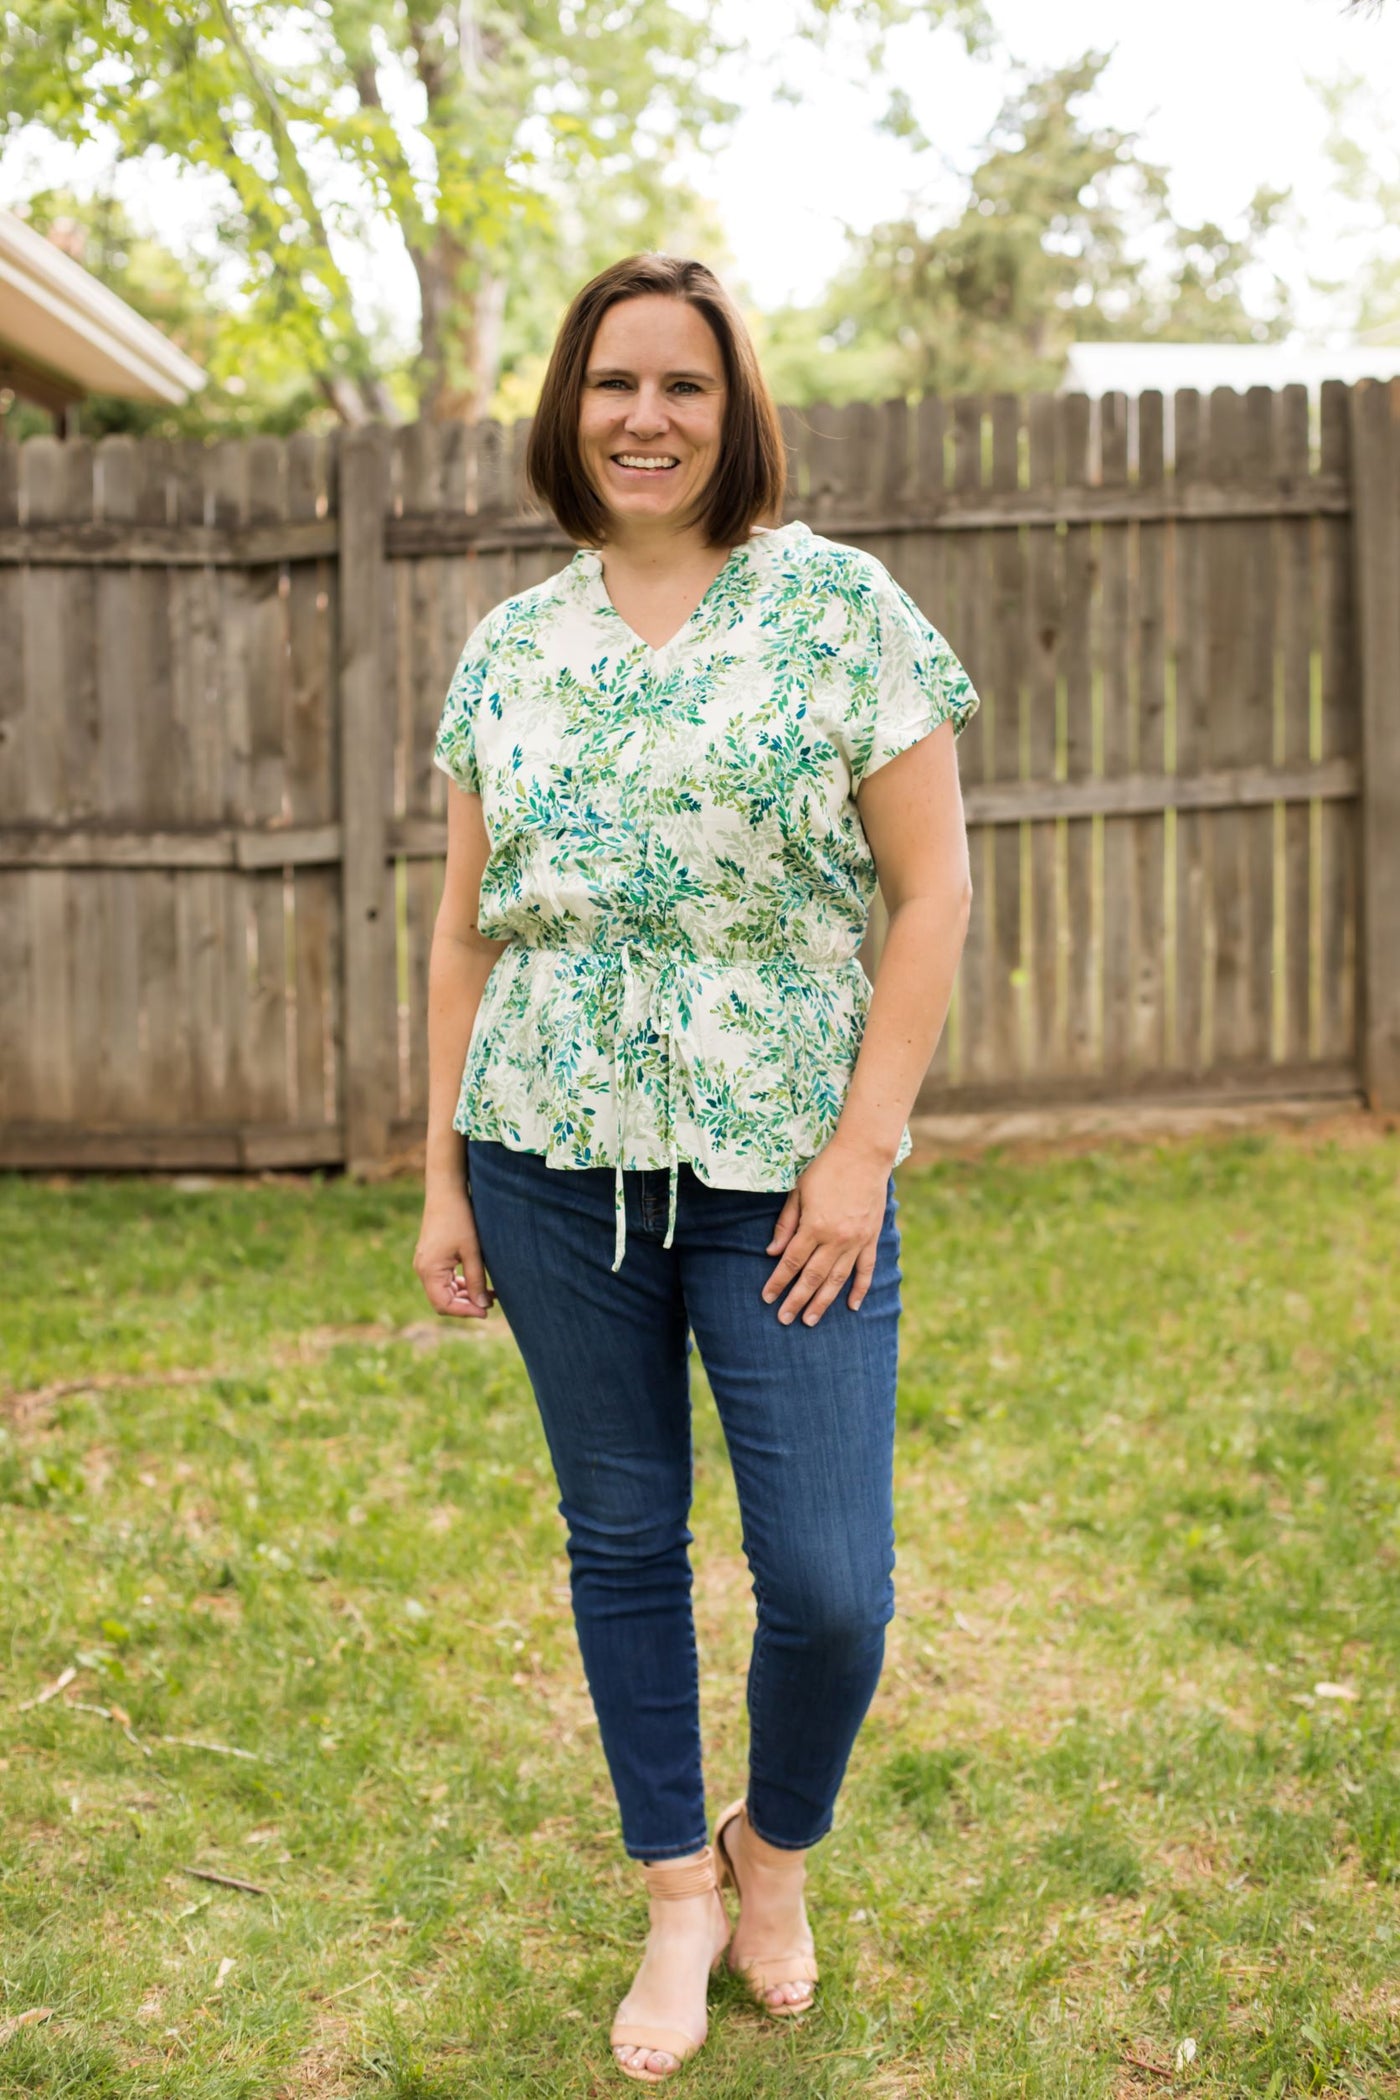 Short Sleeve V-Neck Self Tie Elastic Waist Floral Blouse-Shirts & Tops-Staccato-Stella Violet Boutique in Arvada, Colorado